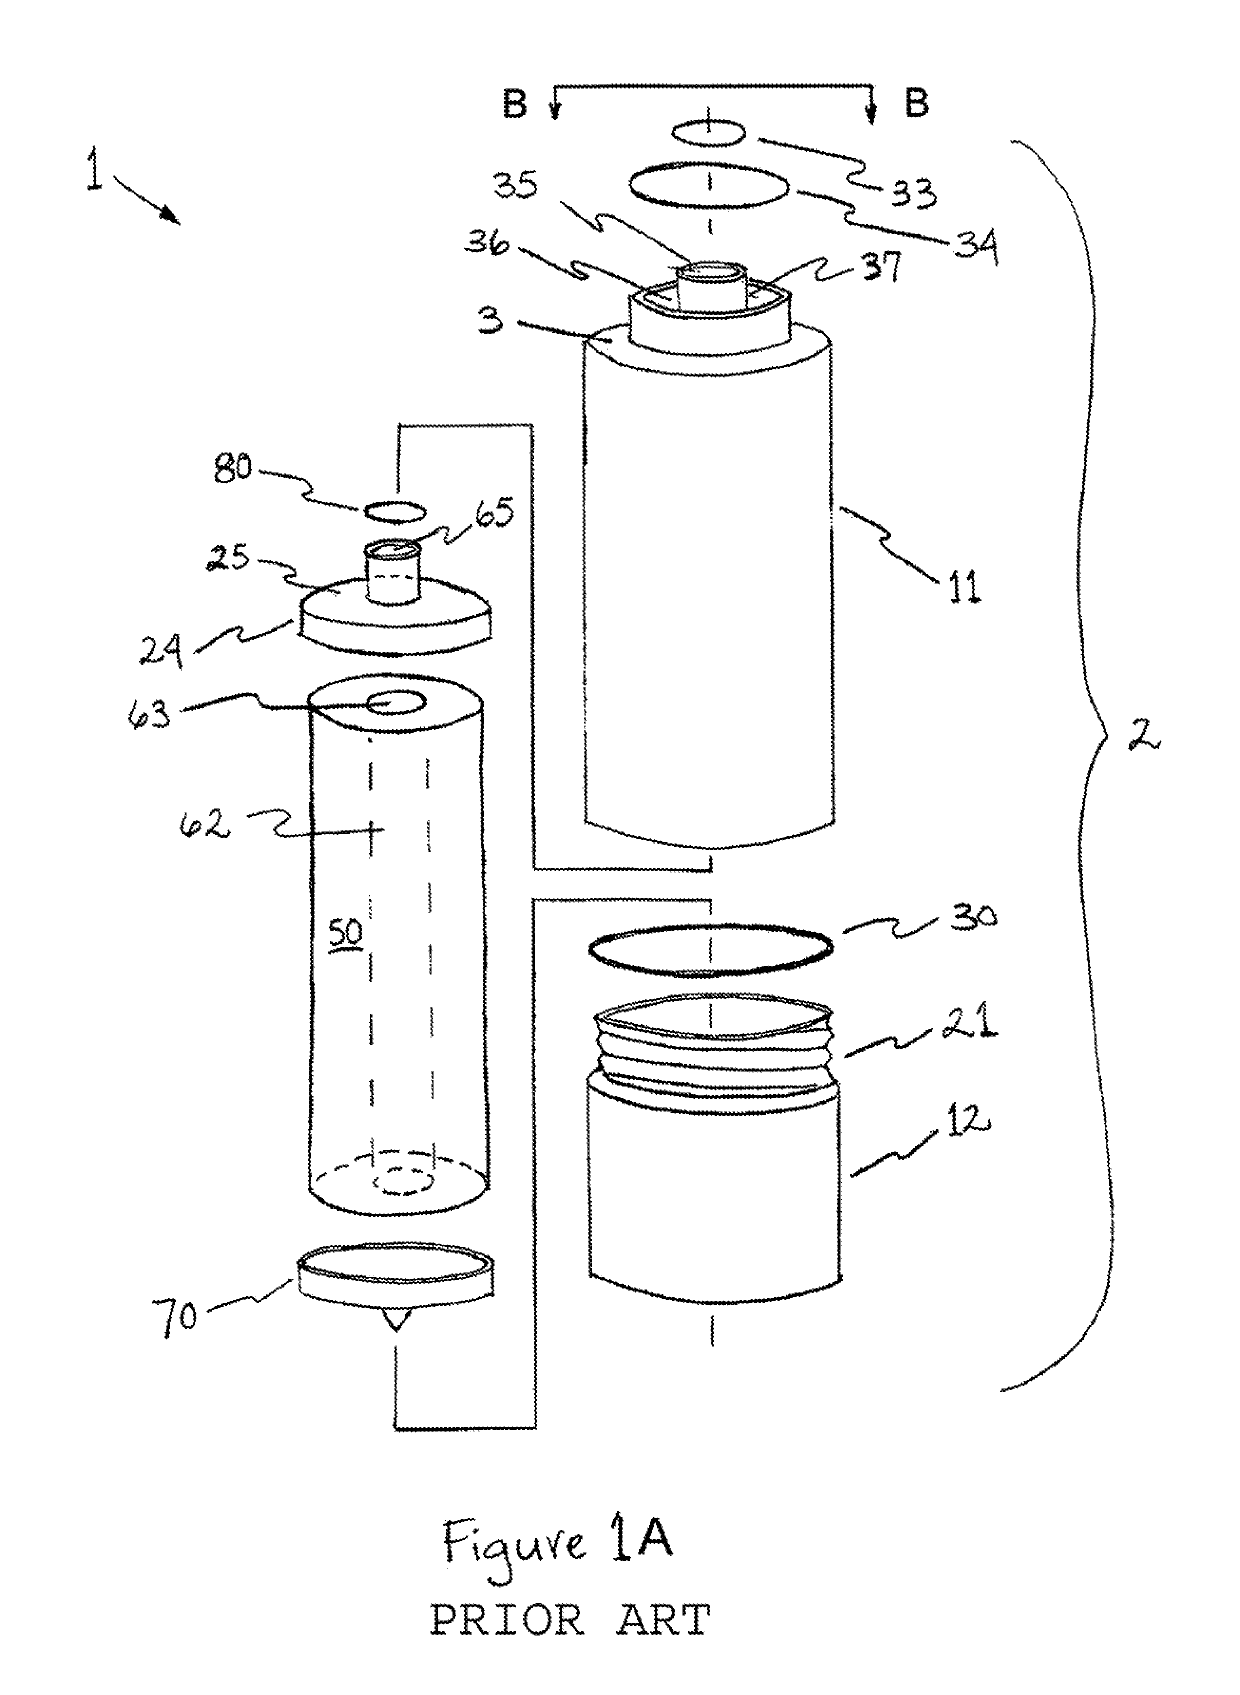 Filter assembly with self-contained disposable filter cartridge